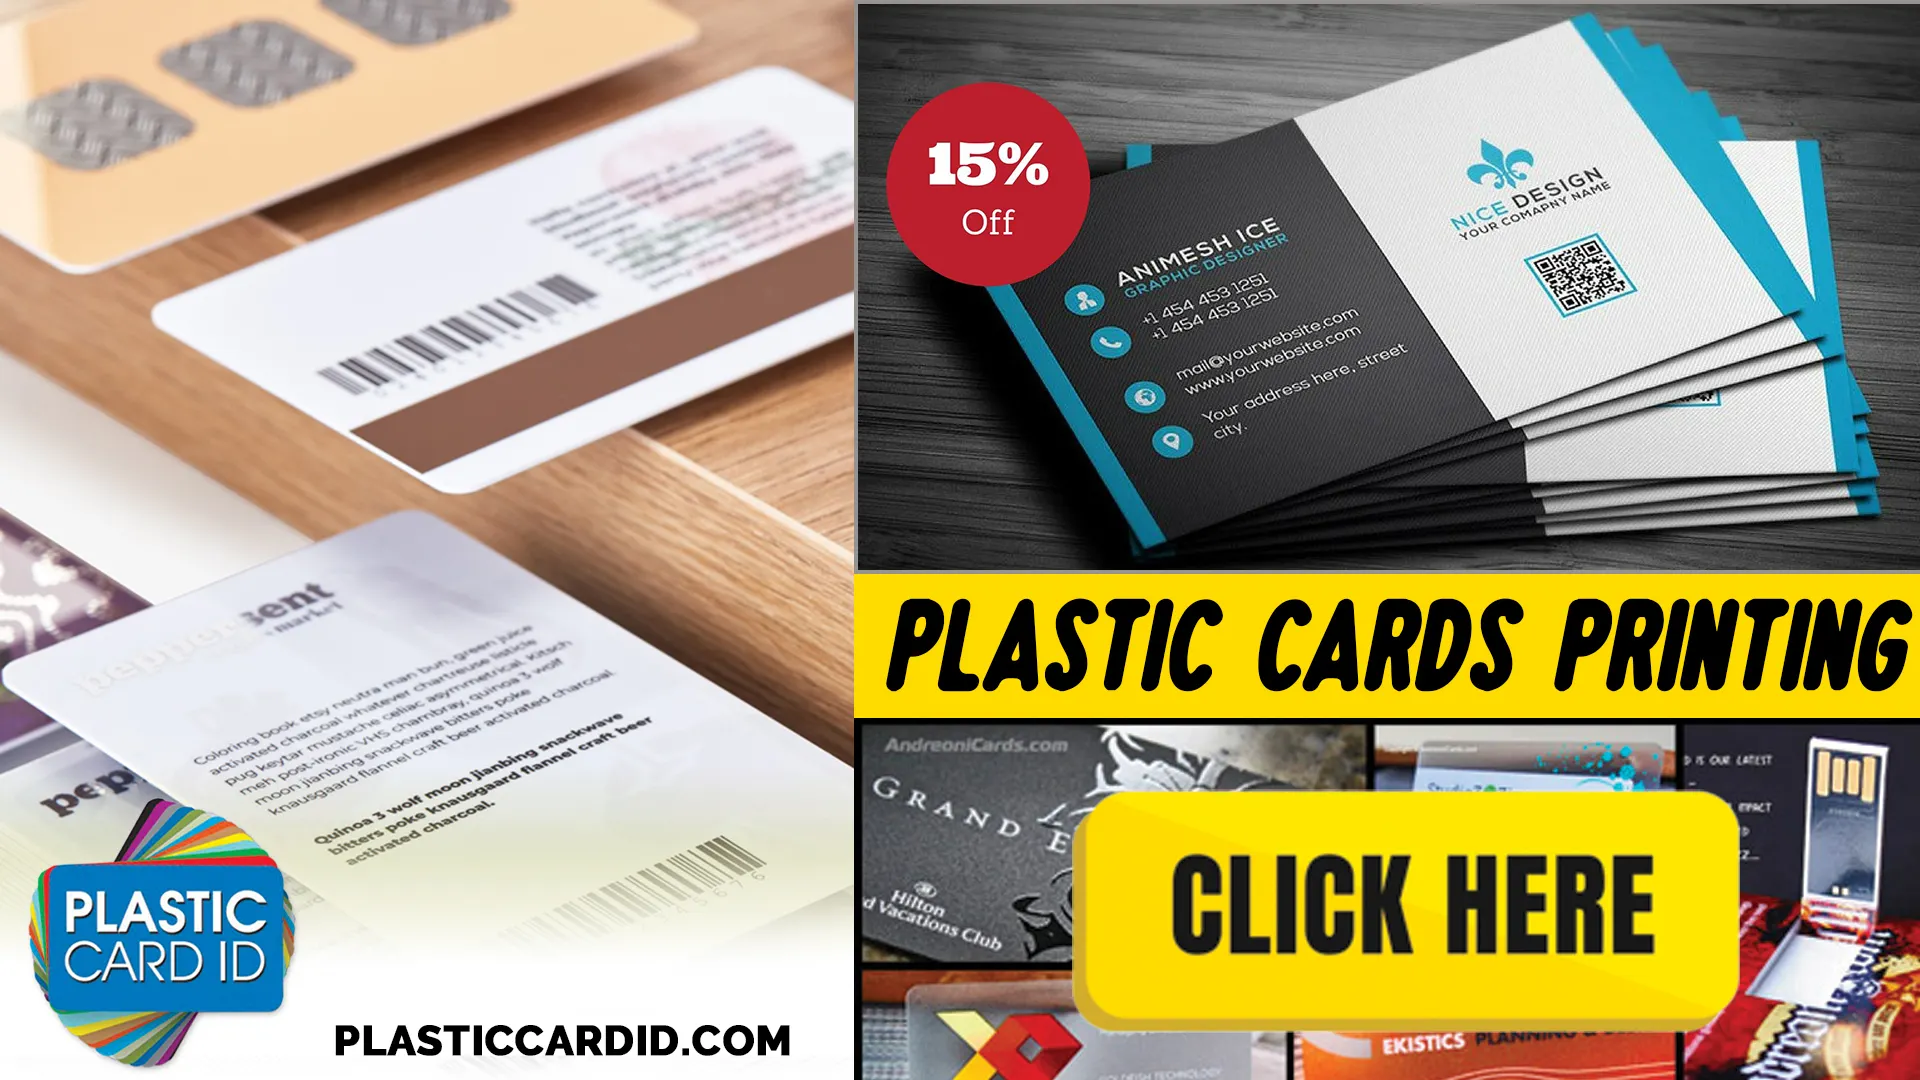 Sustainable Practices: Beyond Card Printing